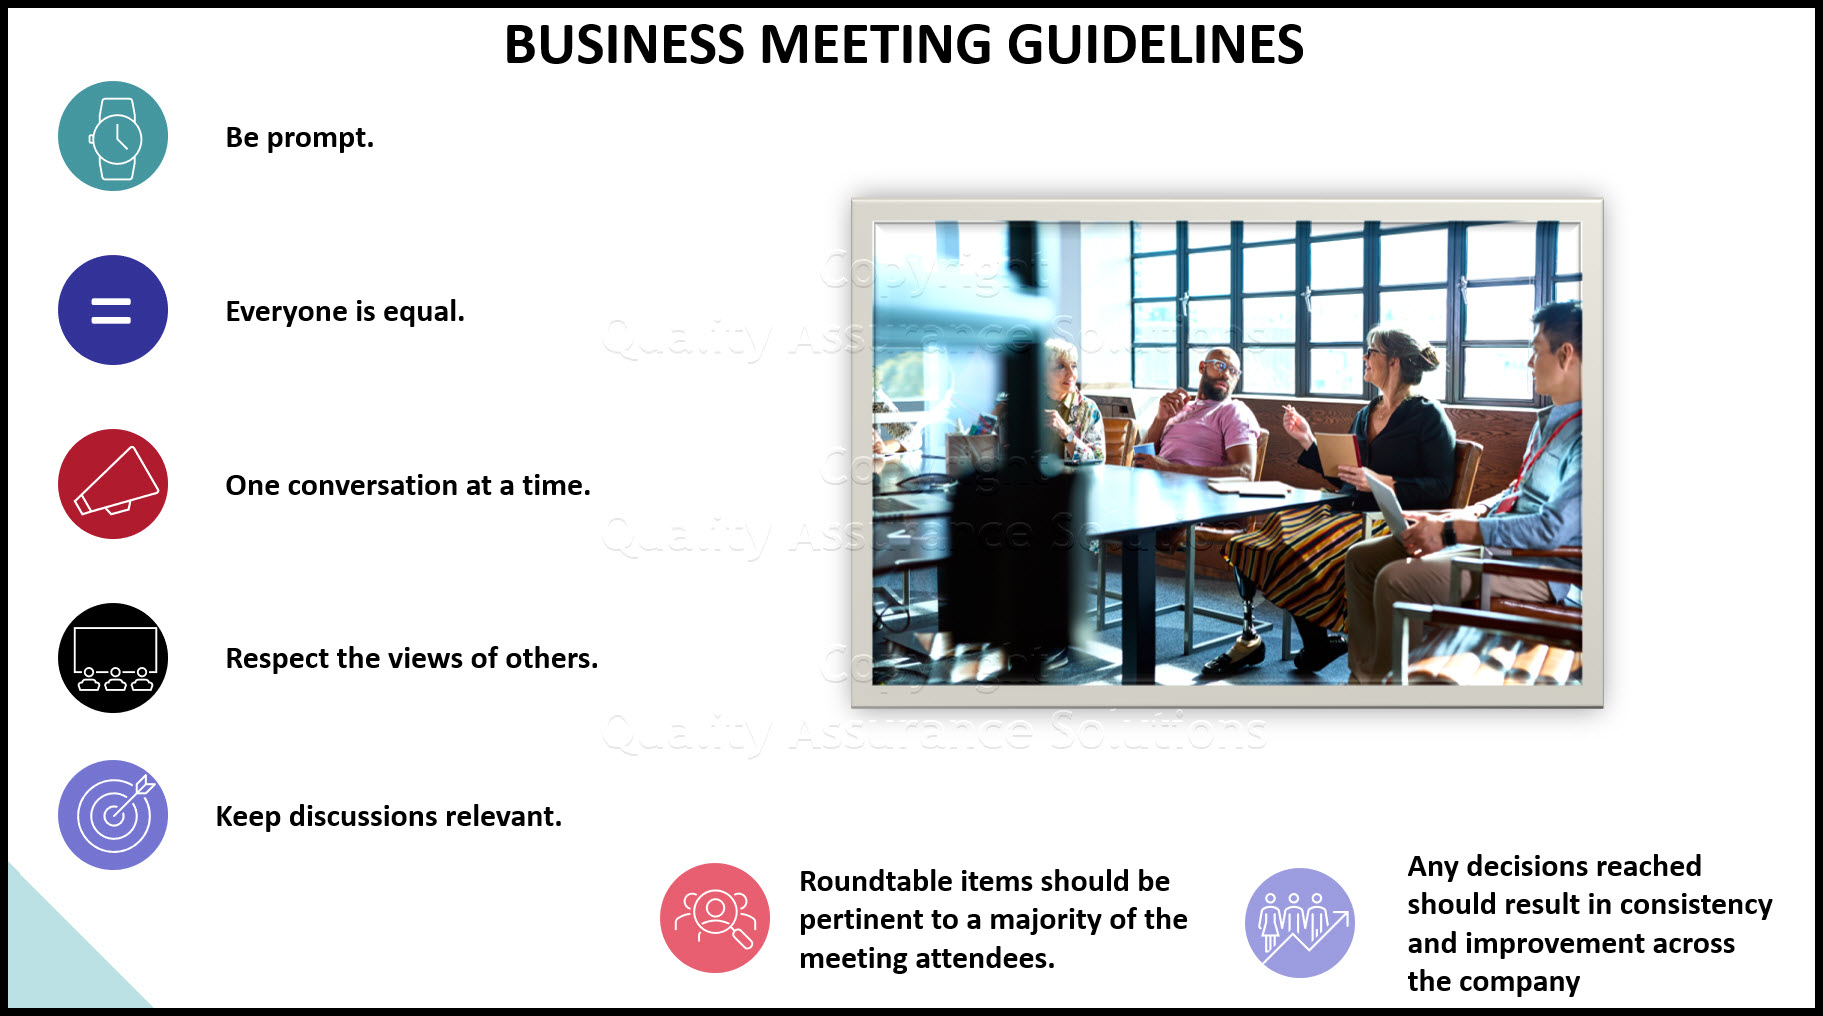 Review how to drive business meetings with this business meeting agenda format. Article includes guidelines, aim, ground rules, agenda, and feedback. In addition, you can download a free meeting notes template  